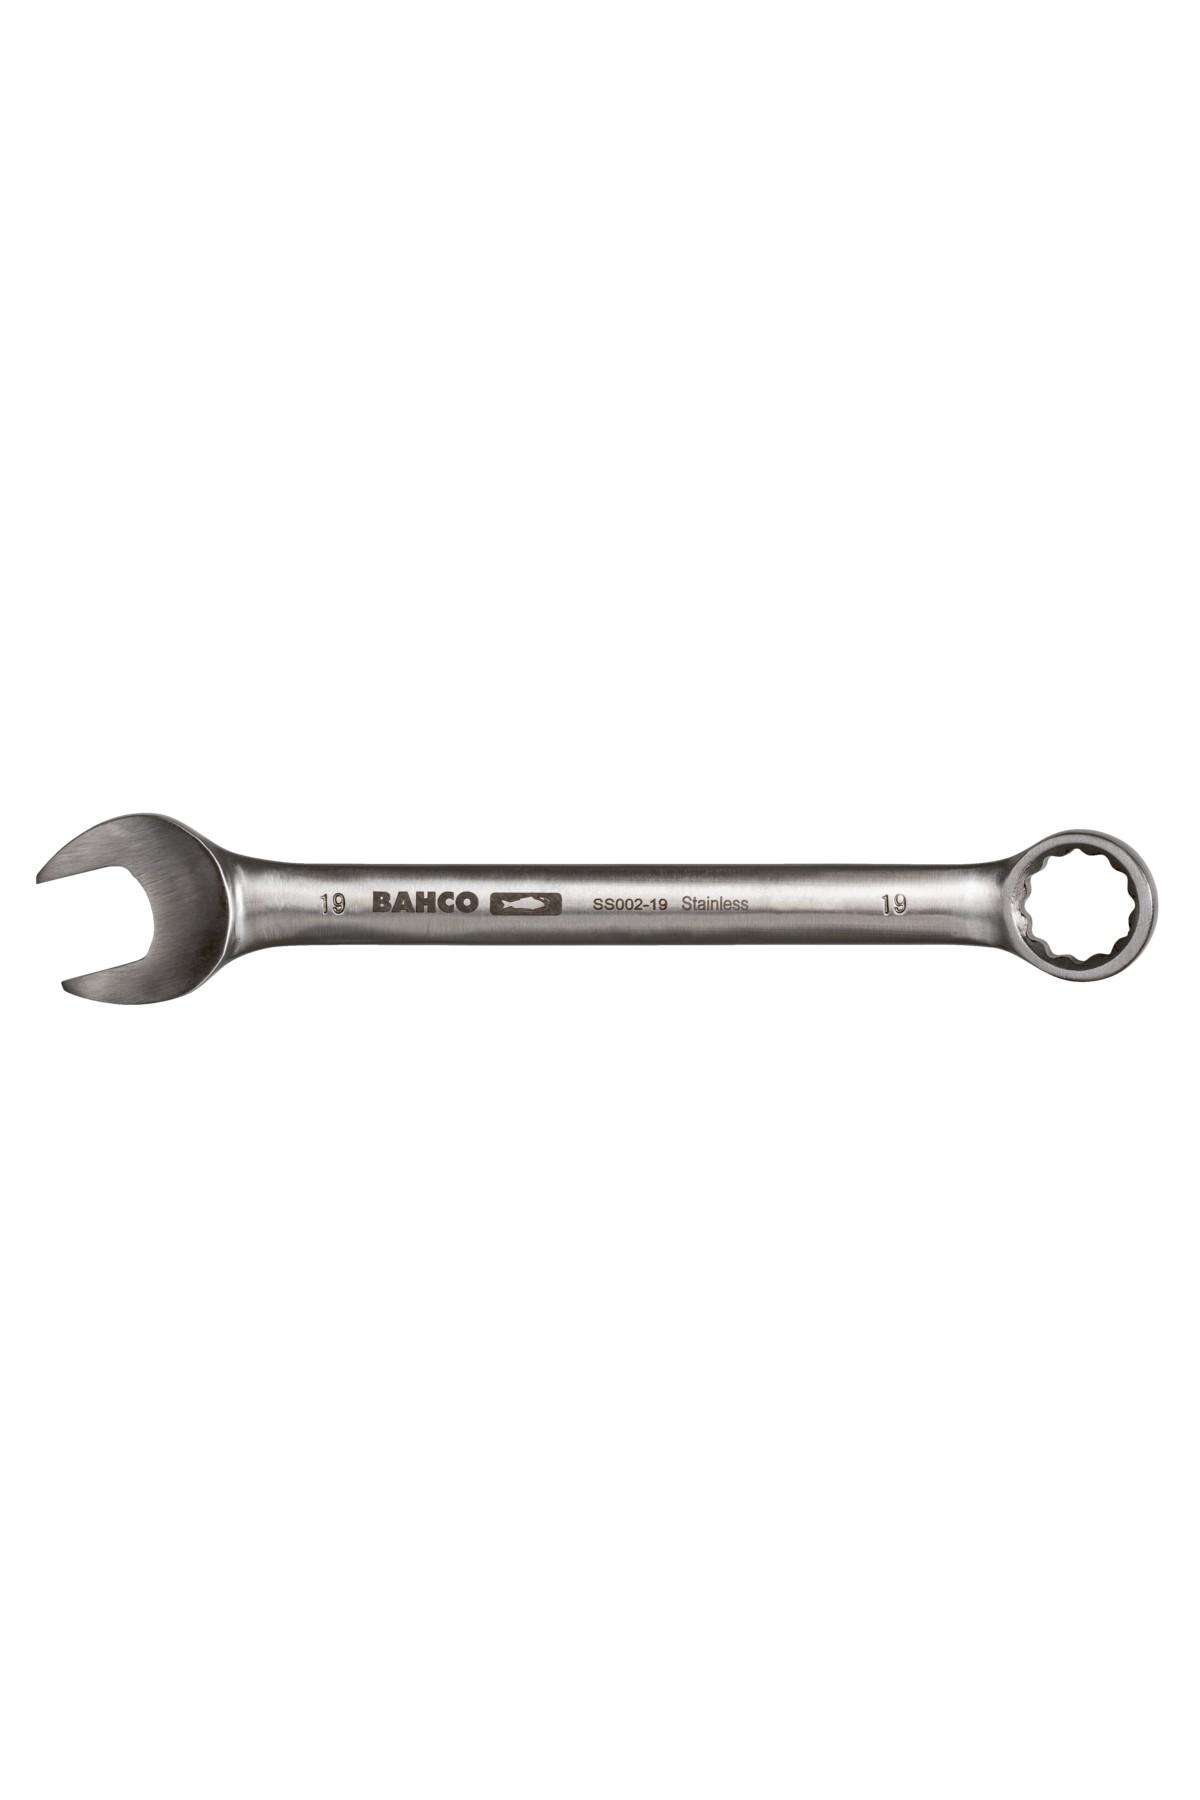 Ring spanner stainless 15mm